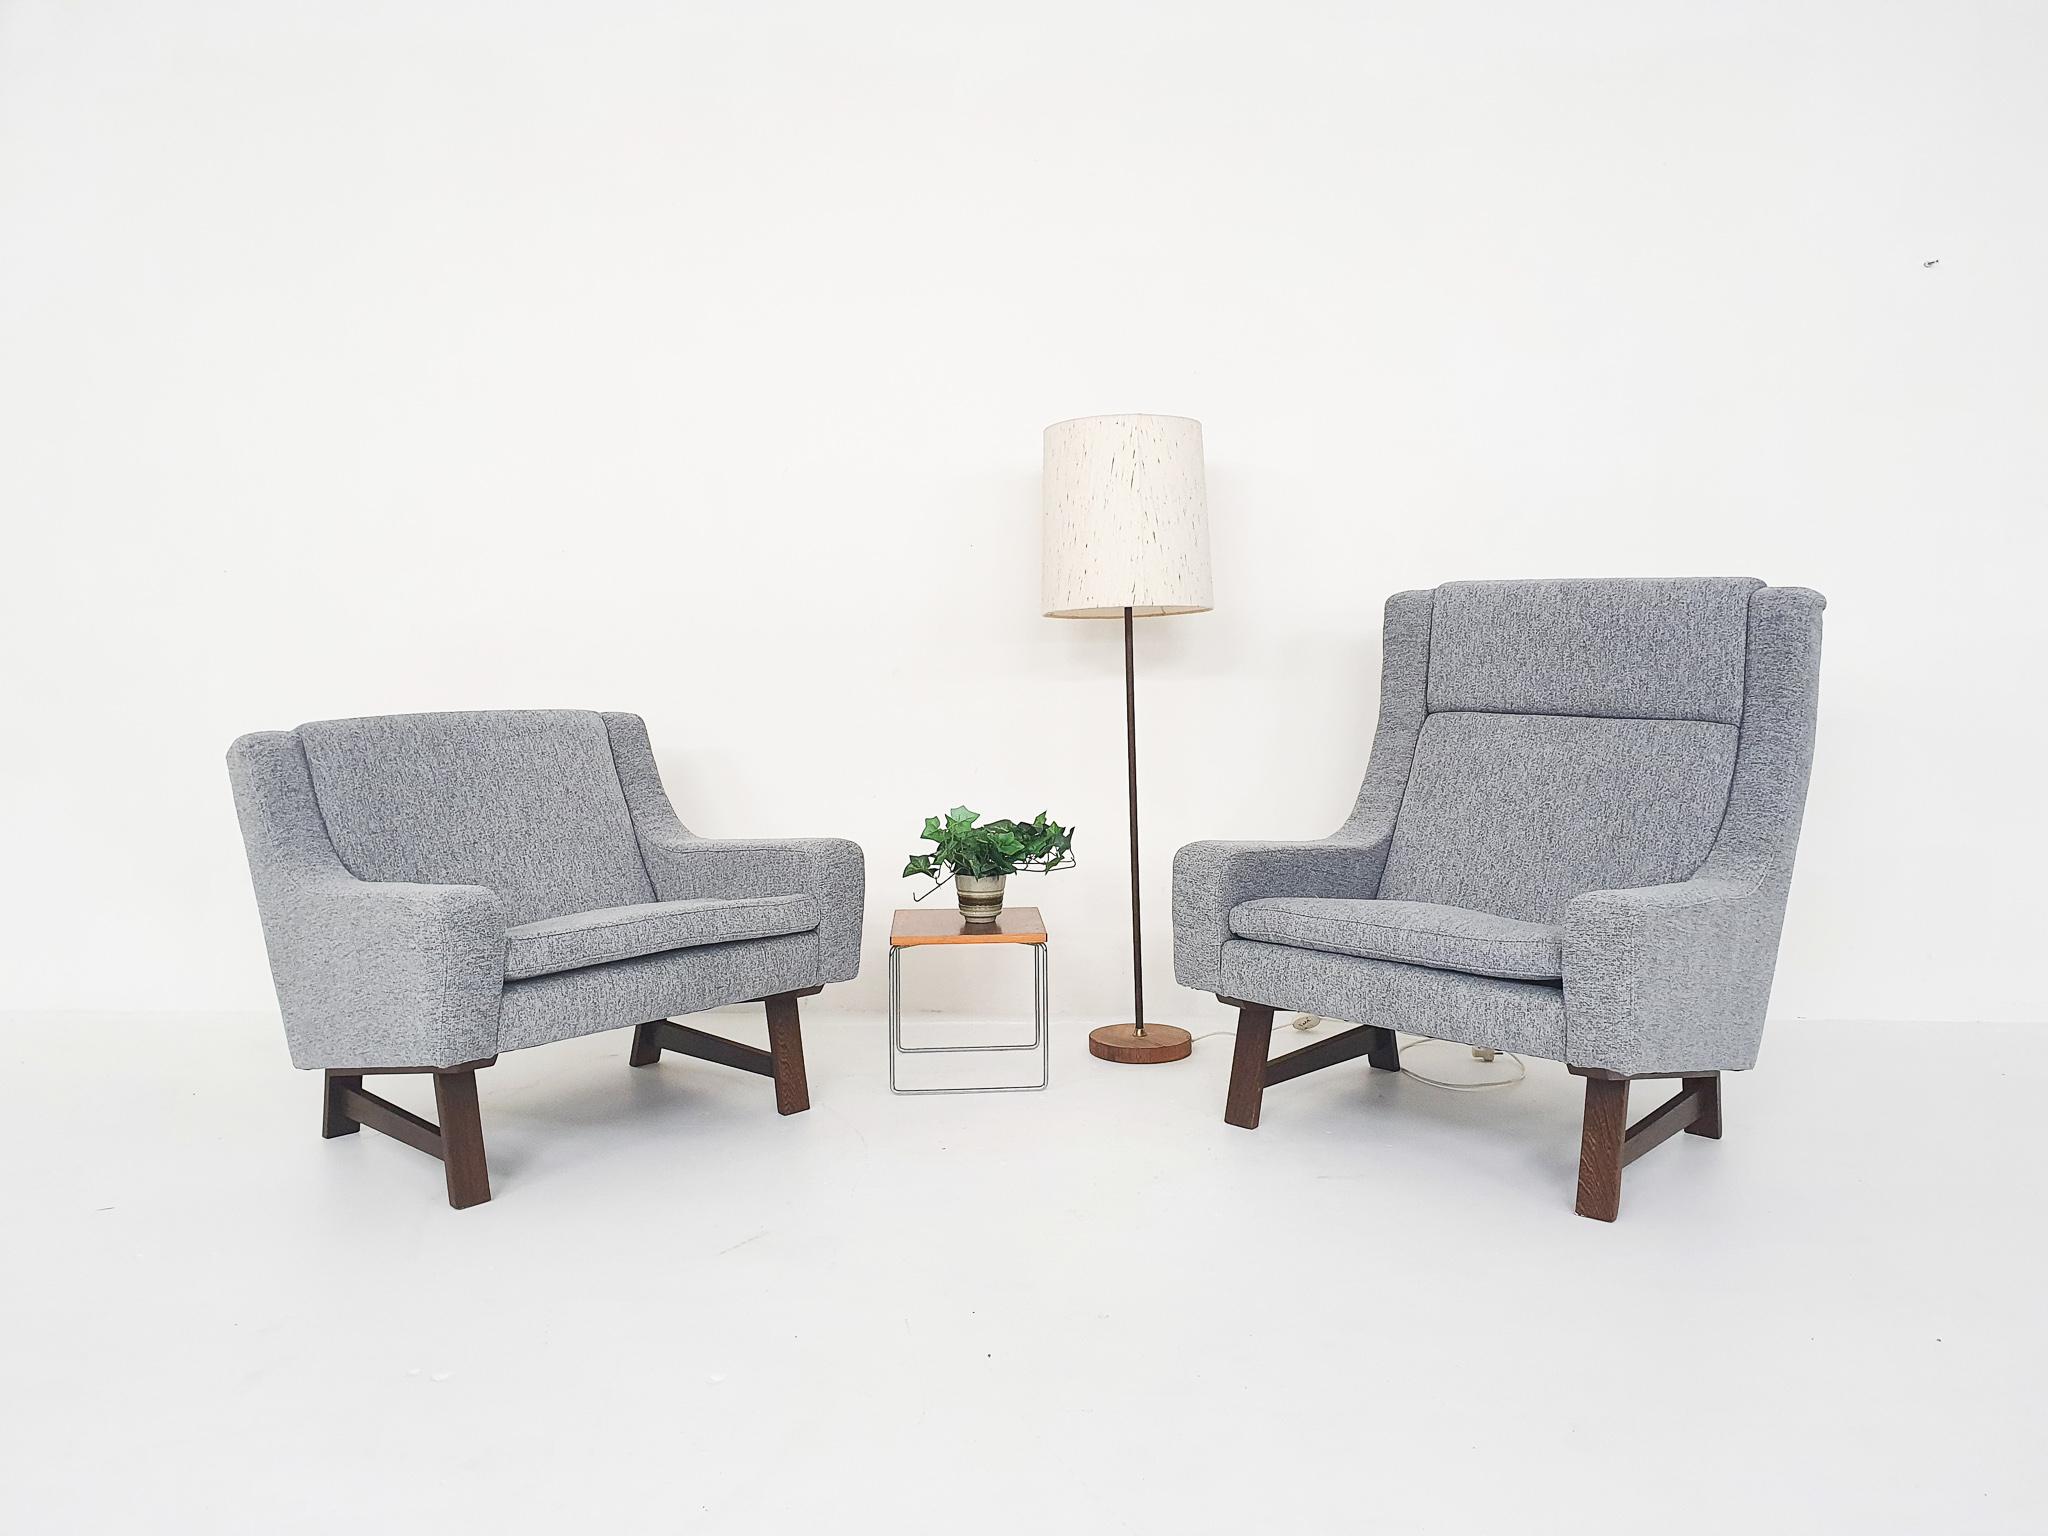 Set of Two Dutch or Scandinavian Design Lounge Chairs with Wenge Feet, 1950s In Excellent Condition For Sale In Amsterdam, NL